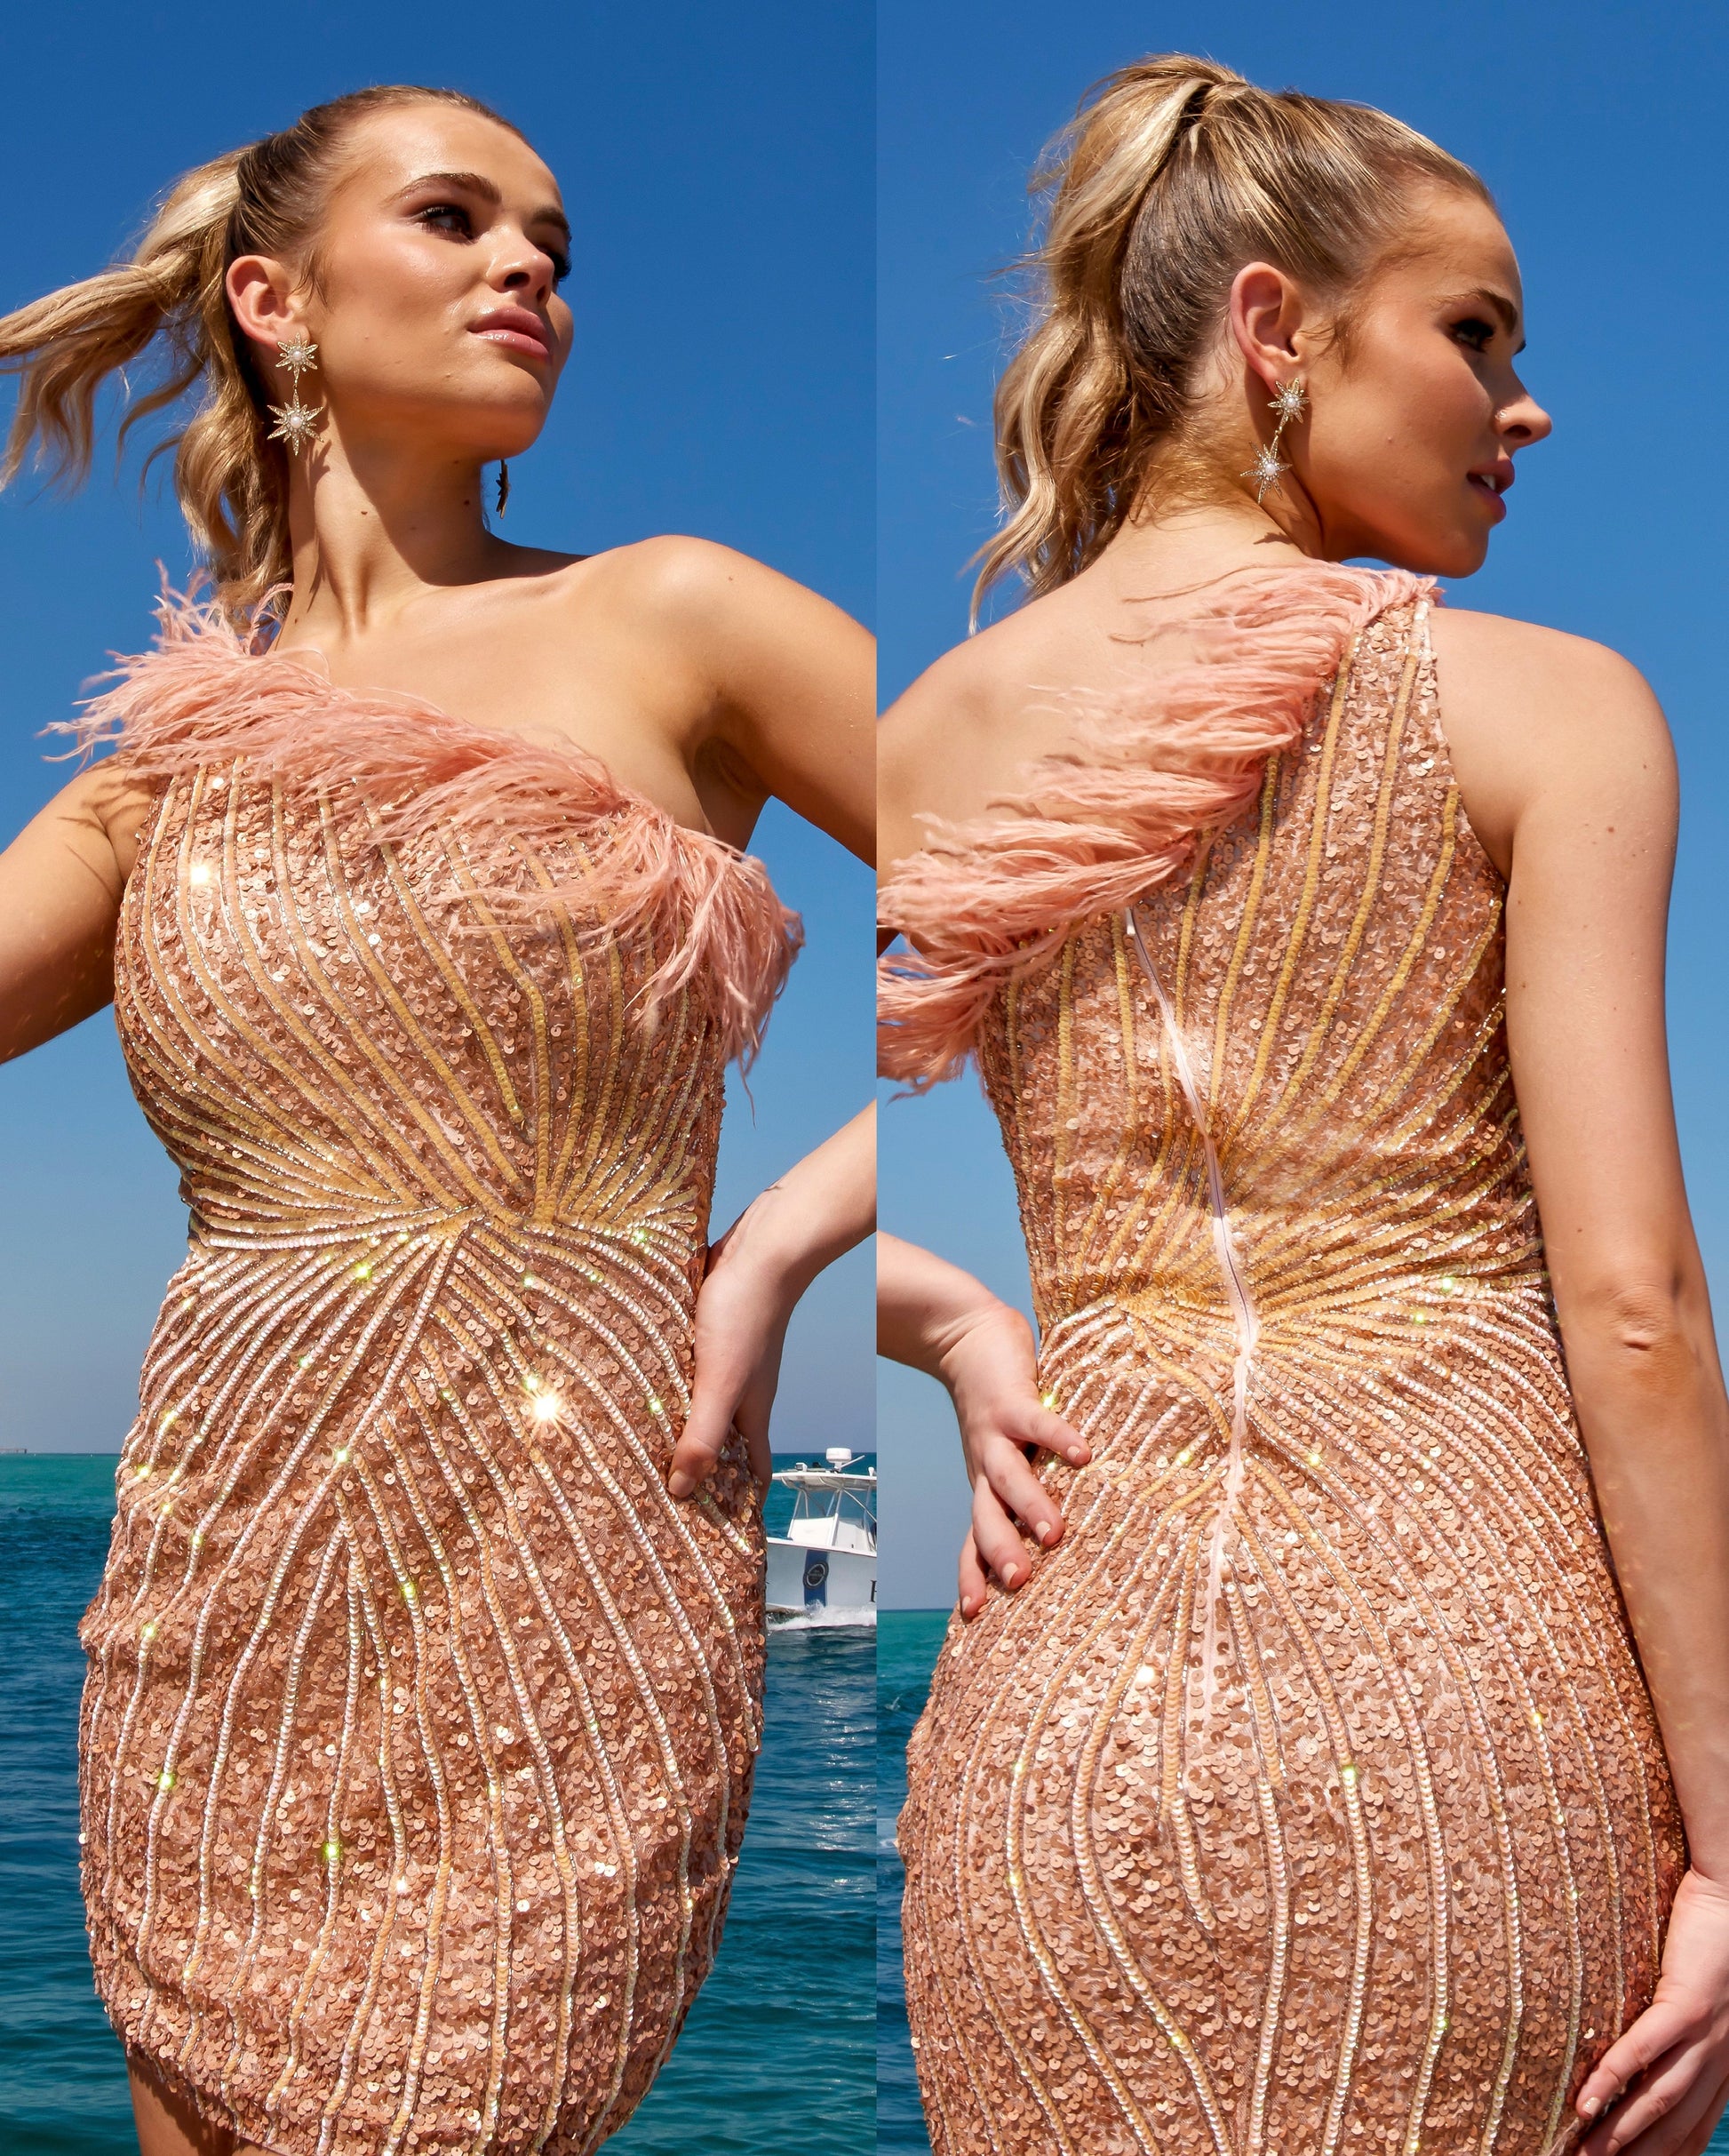 The Primavera Couture 4002 One Shoulder Cocktail Dress is an unforgettable look for your special occasion. A striking one shoulder silhouette is fully embellished with shimmering sequins and features an elegant feather trim. Add sparkle and sophistication to your evening with this showstopping dress.